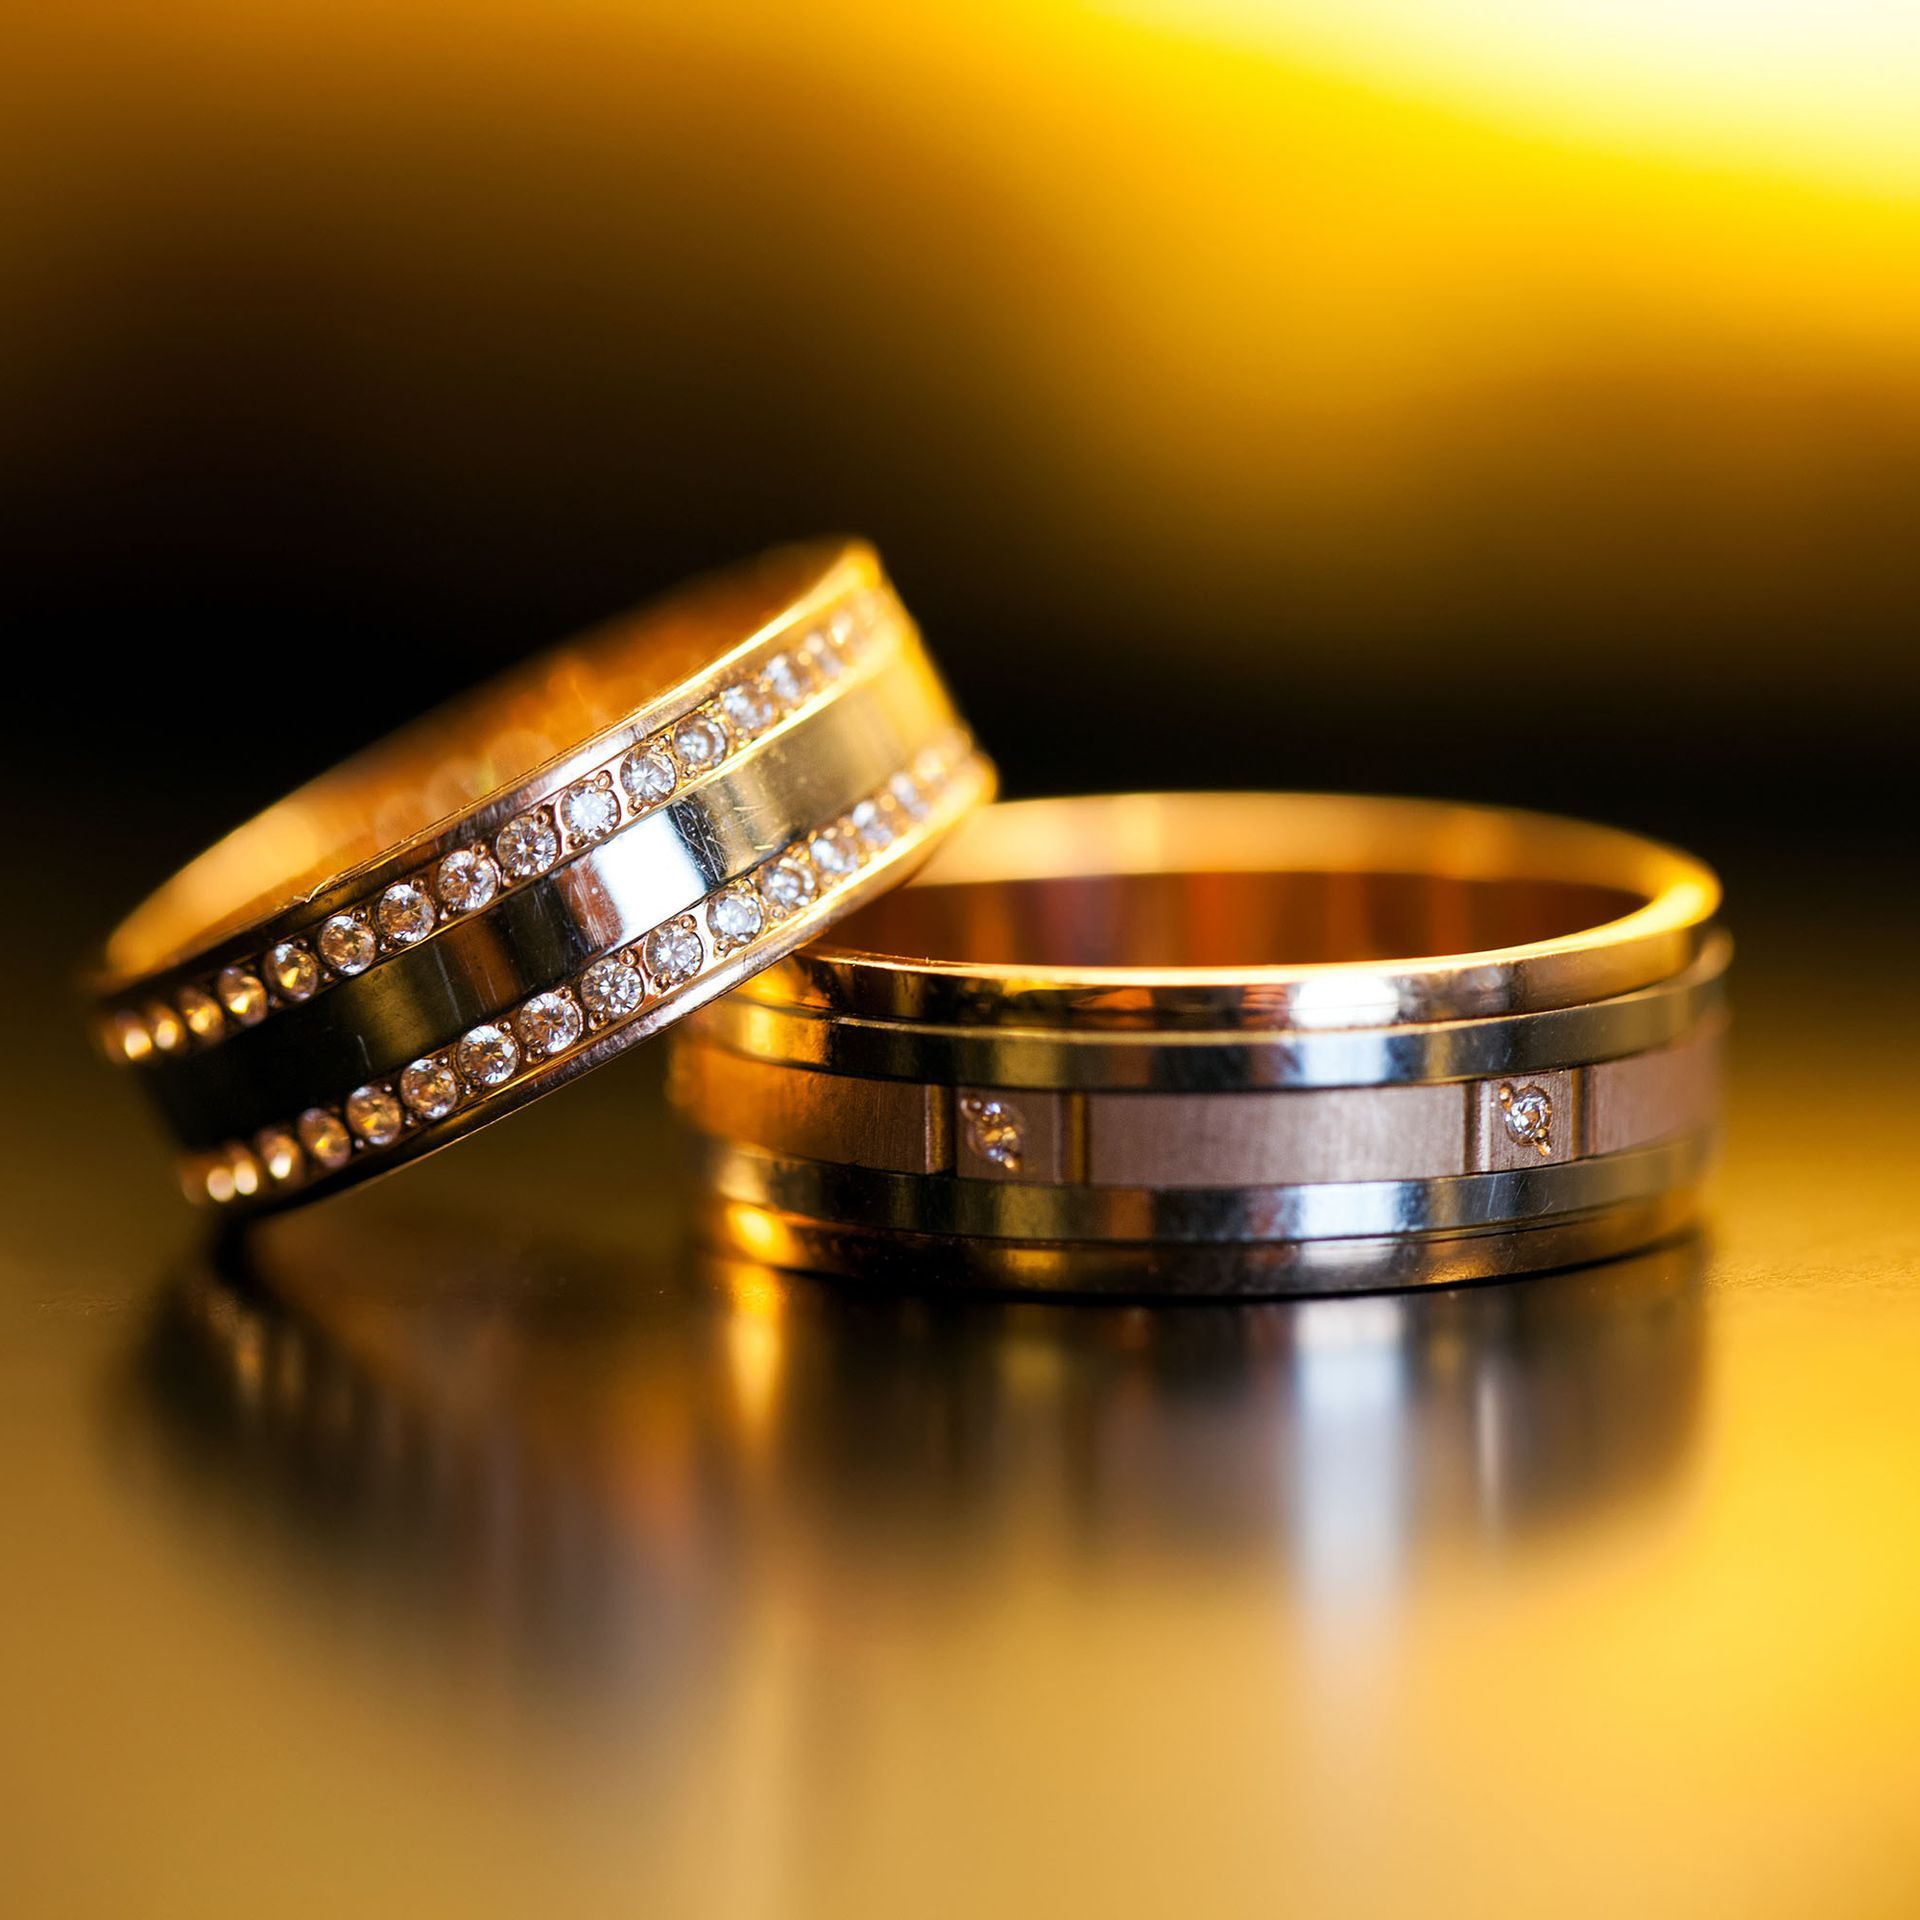 a close up of two wedding rings on a table